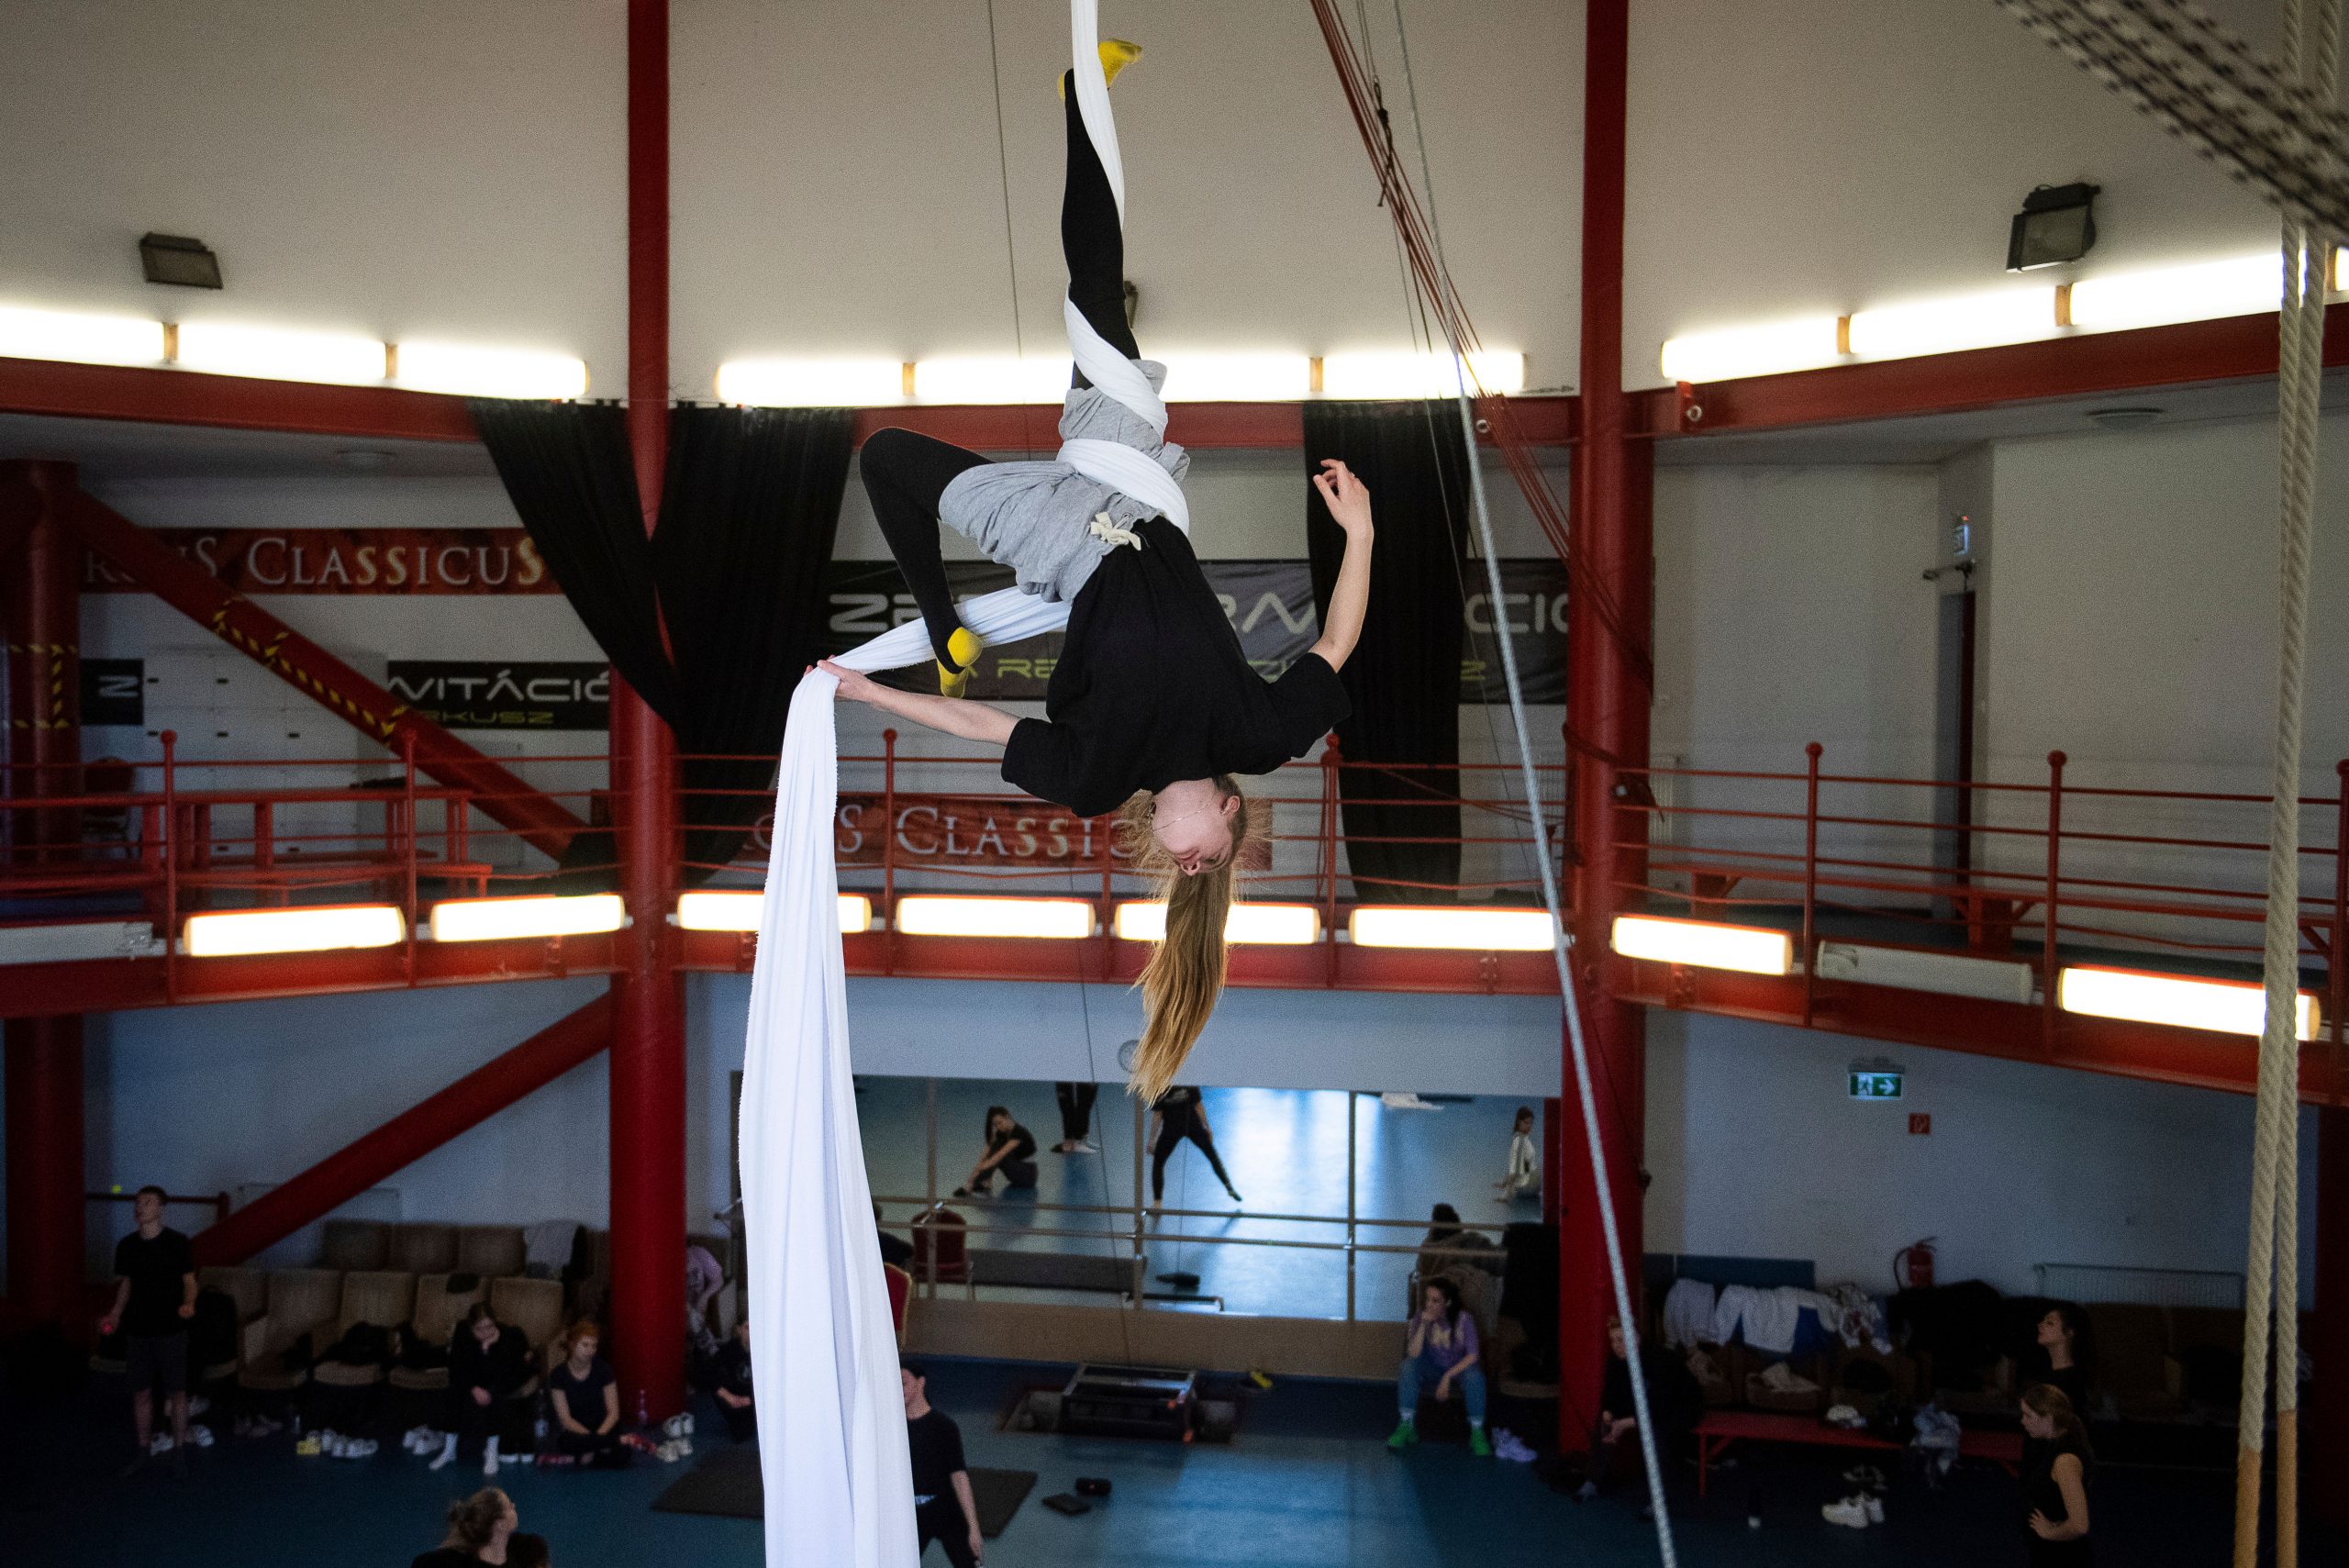 Ukrainian circus performers find home in neighbouring Hungary